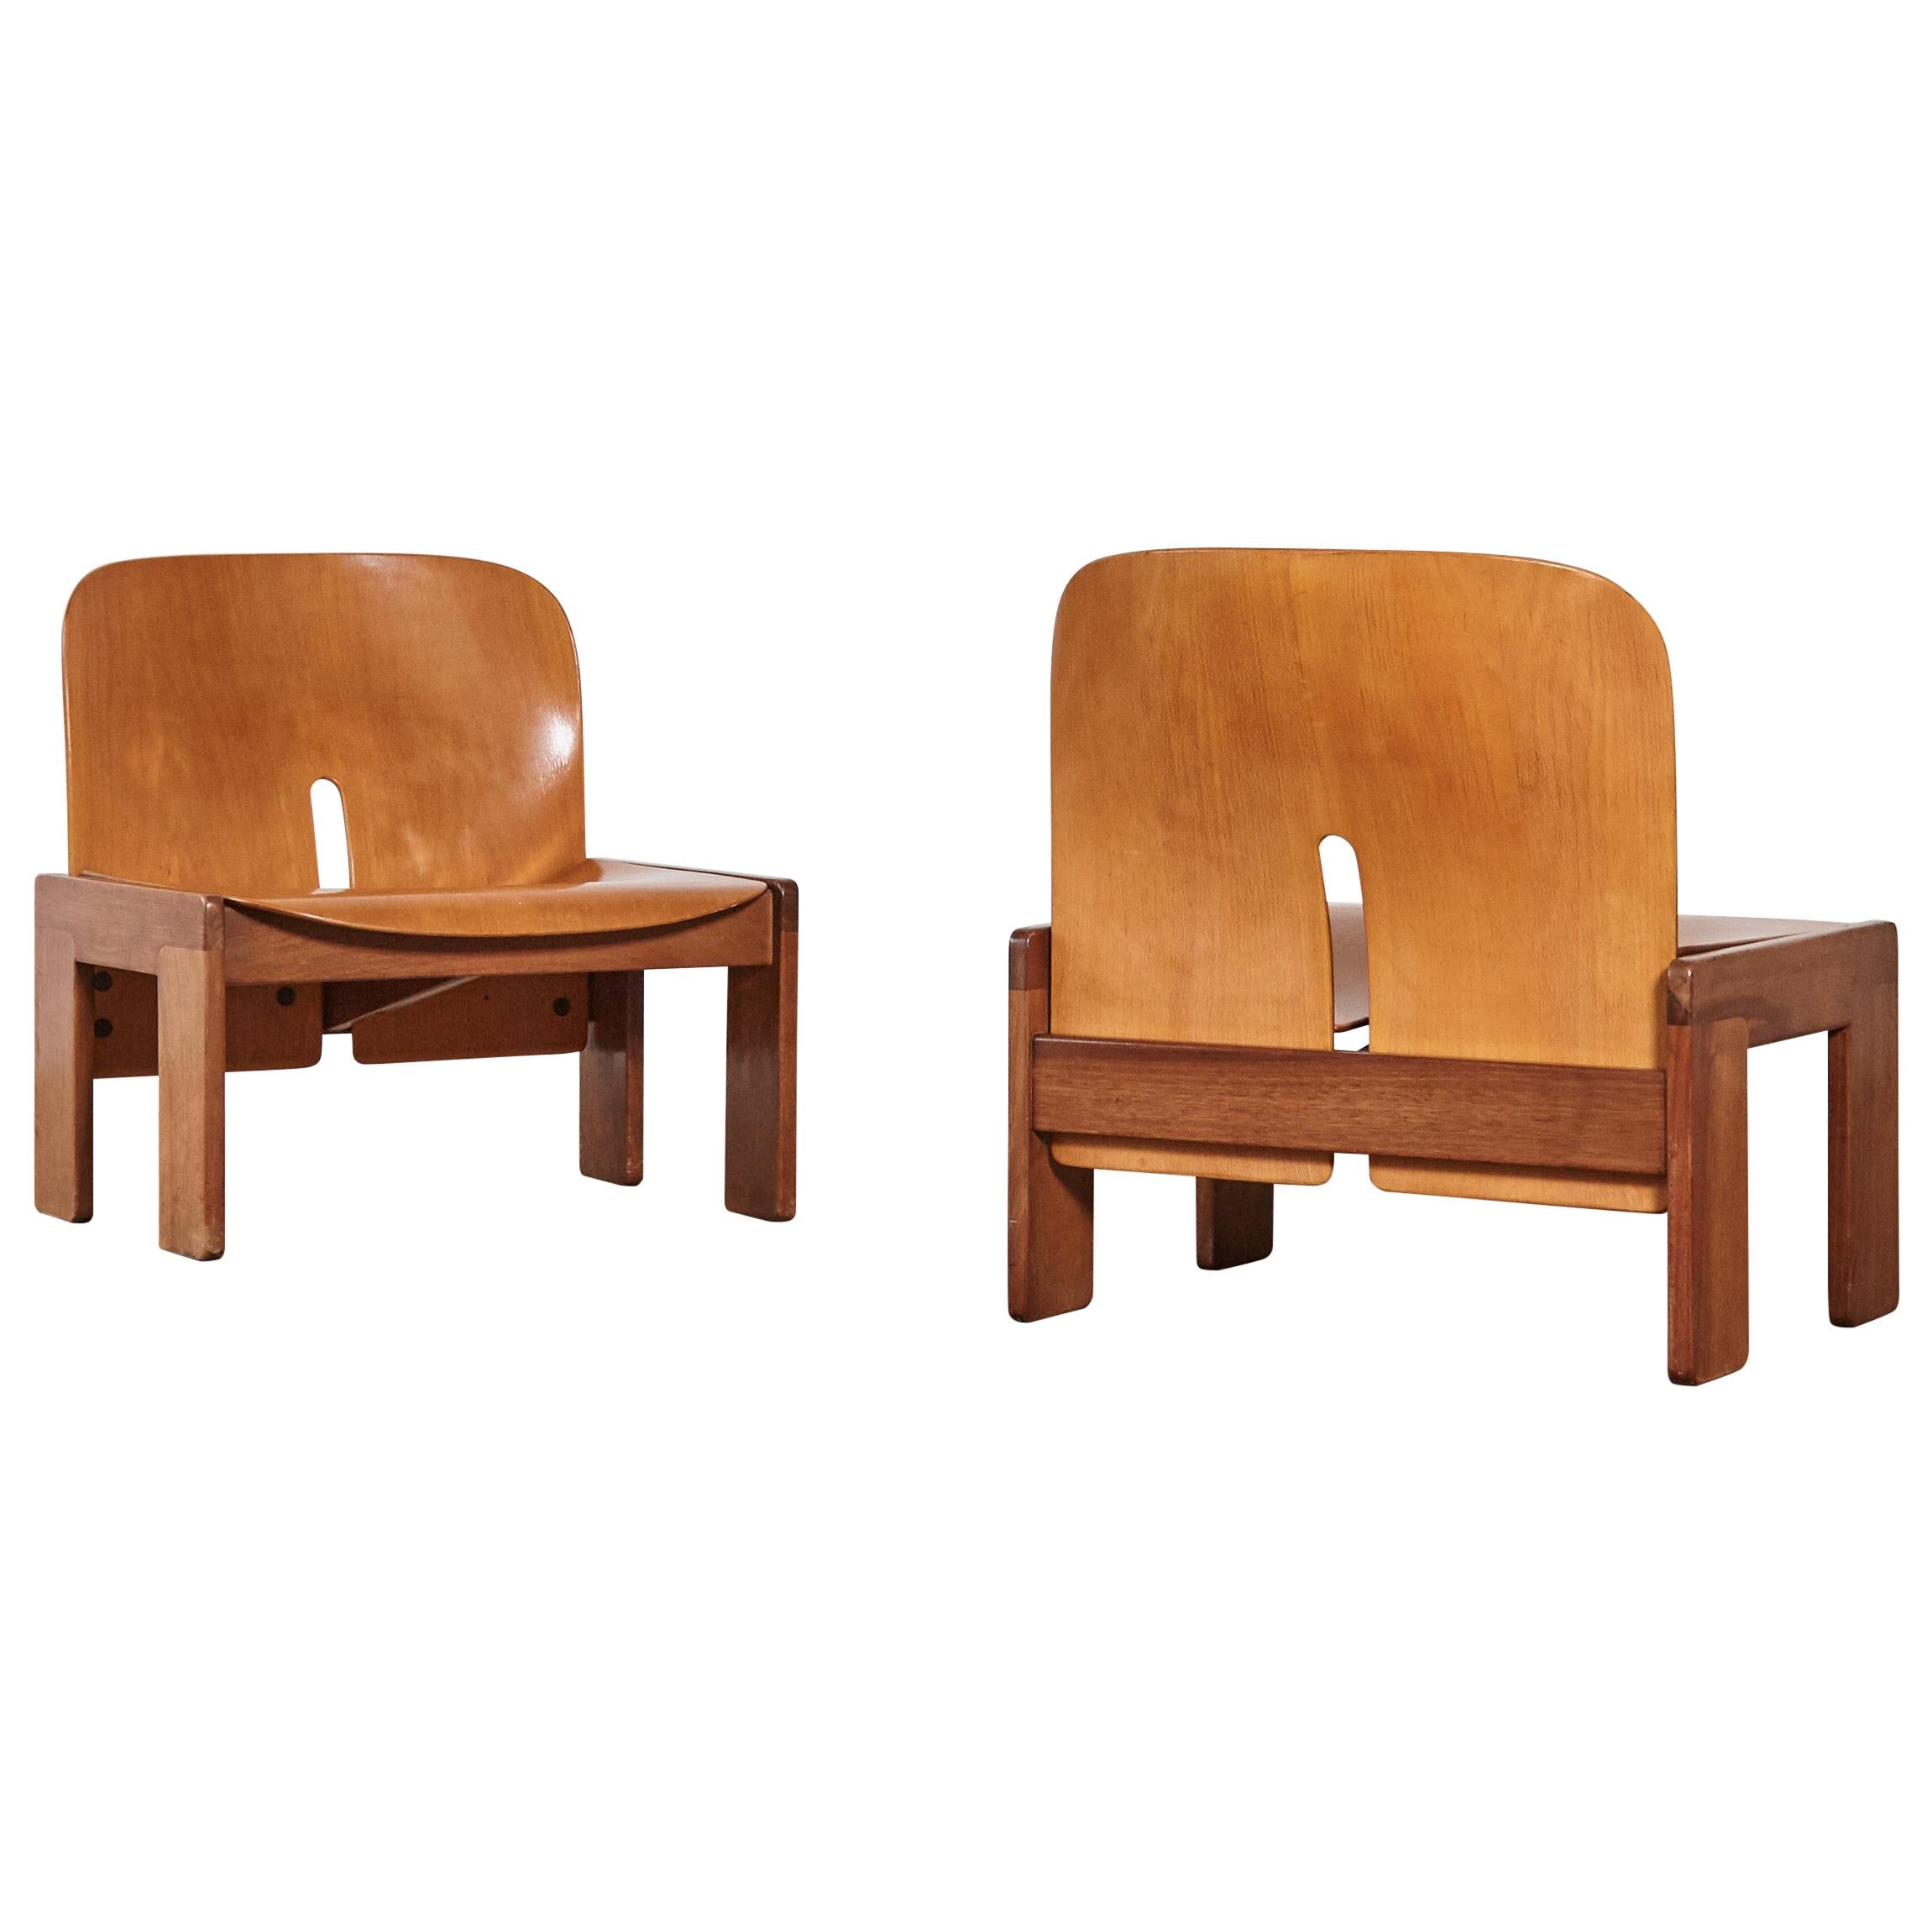 Rare Pair of Afra & Tobia Scarpa 925 Lounge Chairs, Cassina, Italy, 1960s